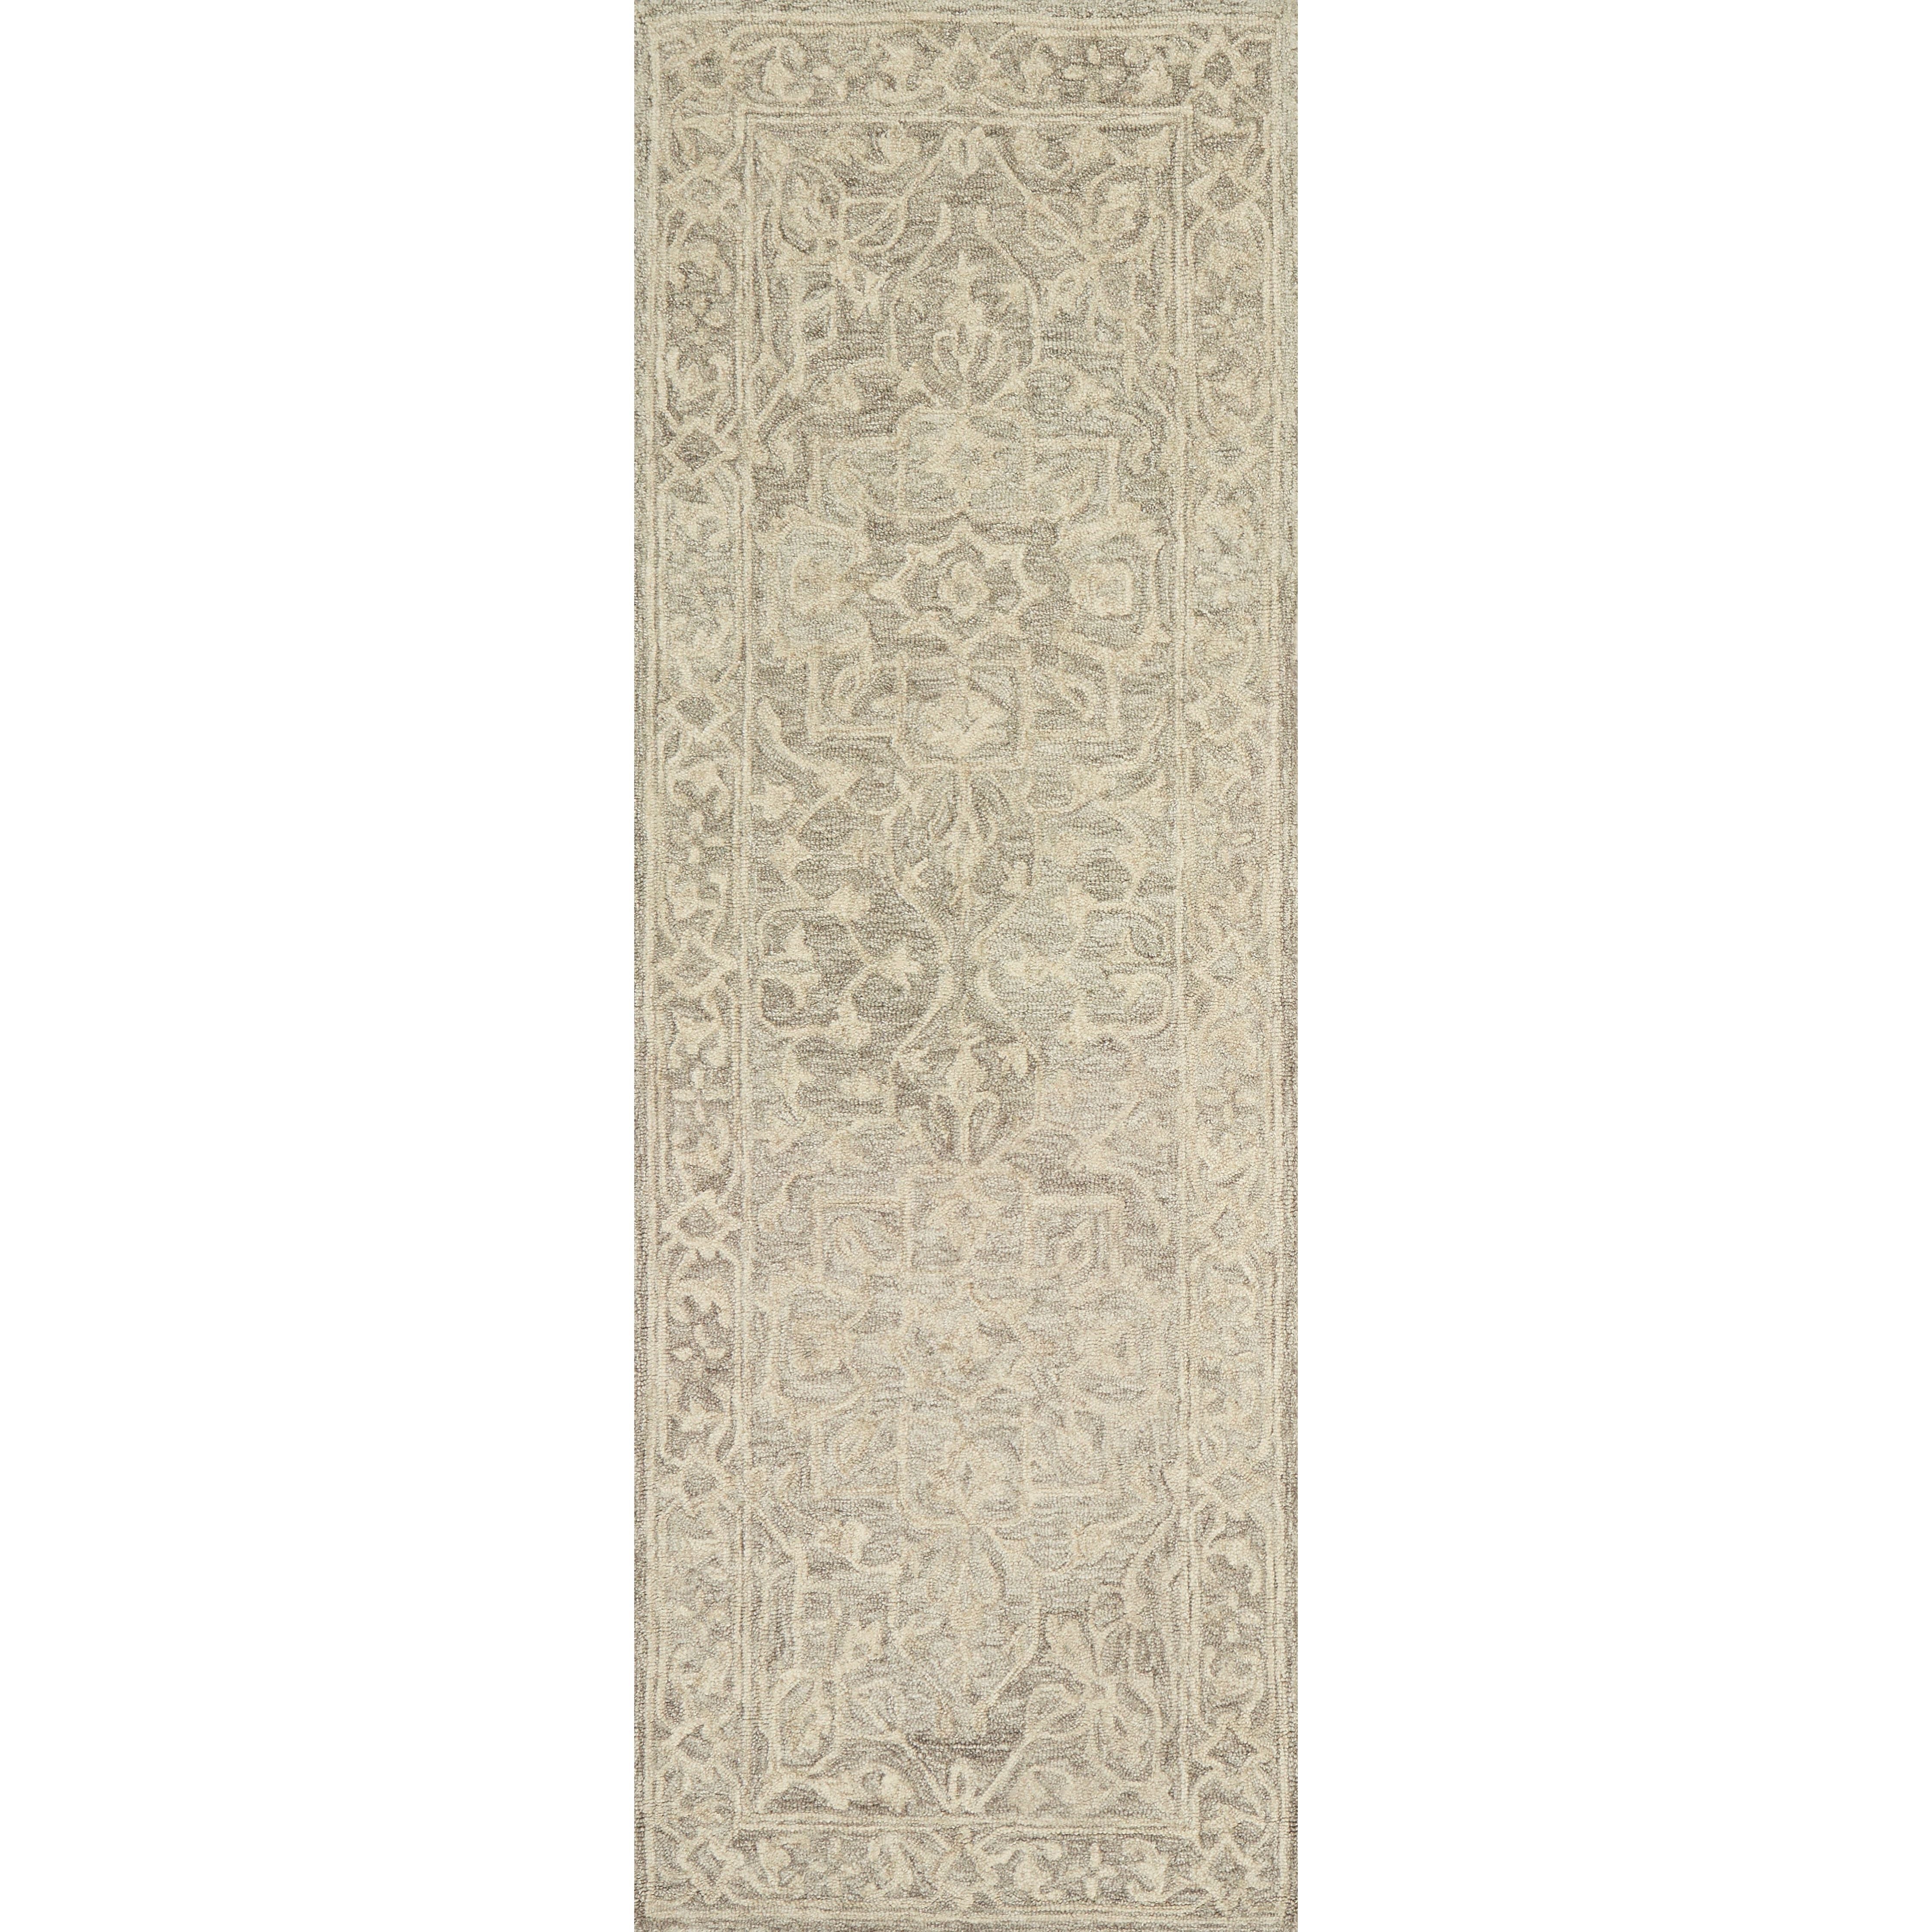 Finely hooked of 100% wool, the carefully crafted Loloi Lyle Stone Area Rug, or LK-02, is acclaimed for its soft texture and muted color range. Each piece showcases space-dyed wool, which lends a subtle gradation of hues throughout the traditional motifs. 